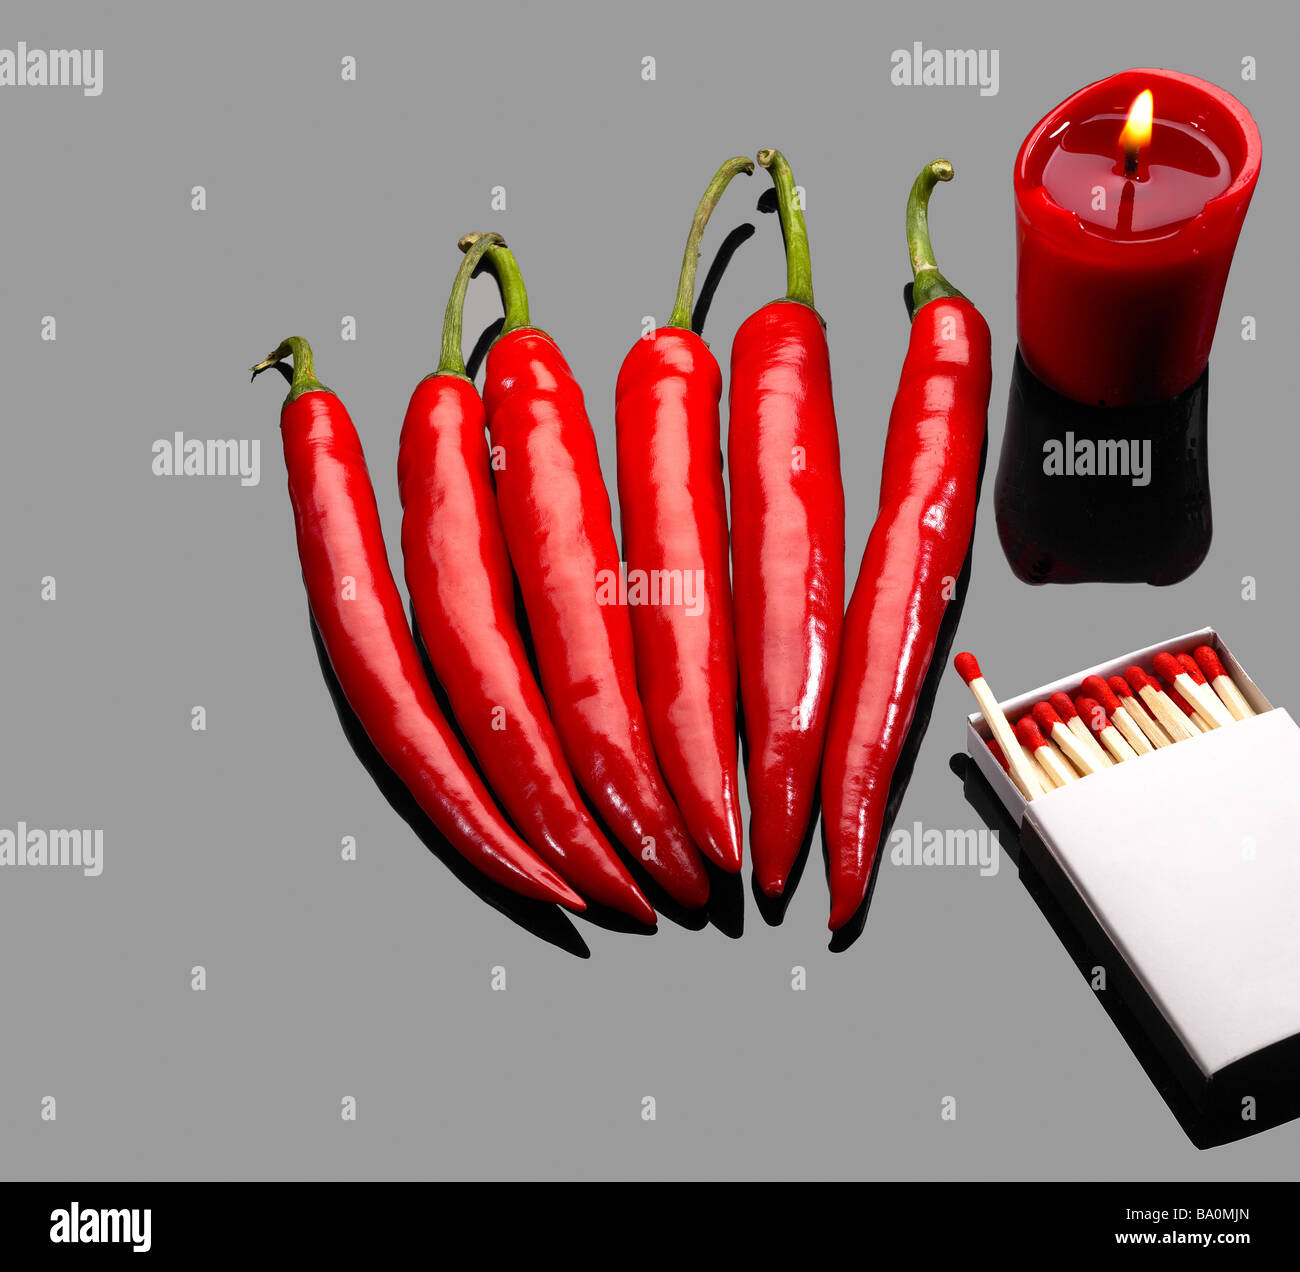 fresh red chili peppers with matches and lighted red candle over grey reflective surface Stock Photo